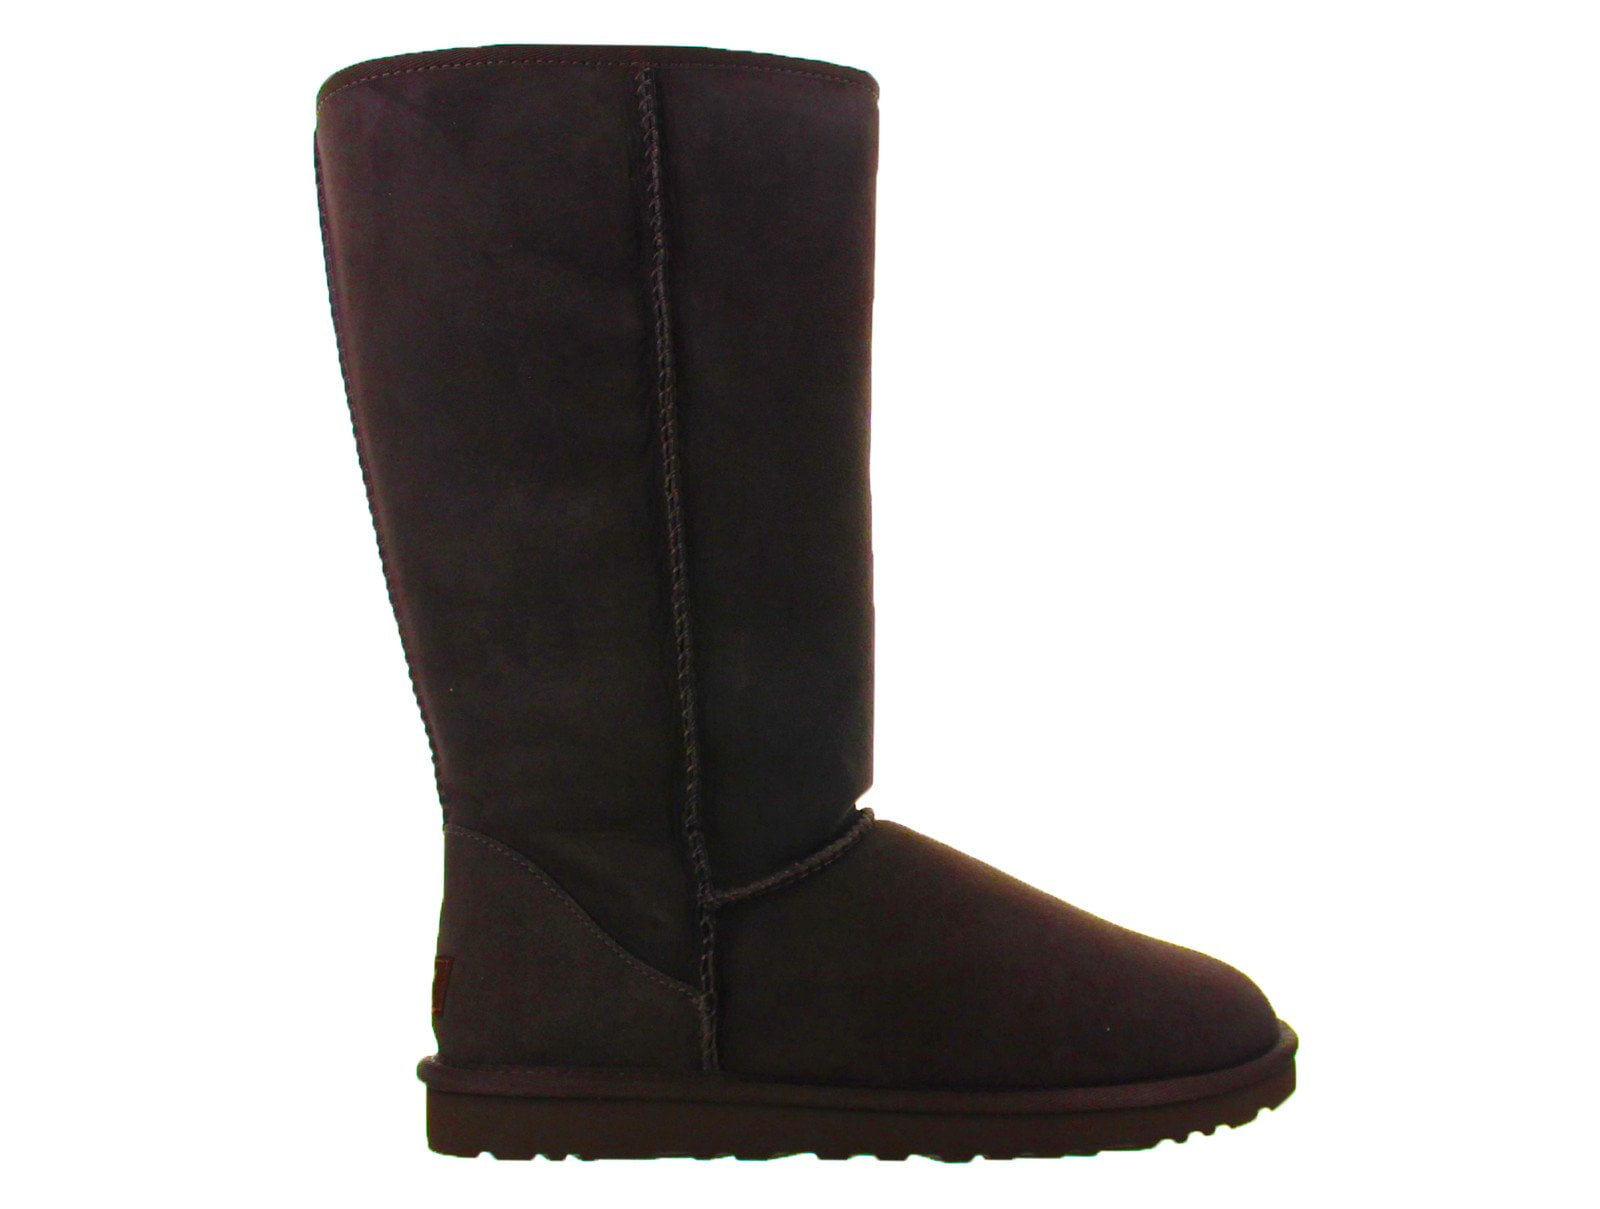 Buy > chocolate brown ugg boots > in stock